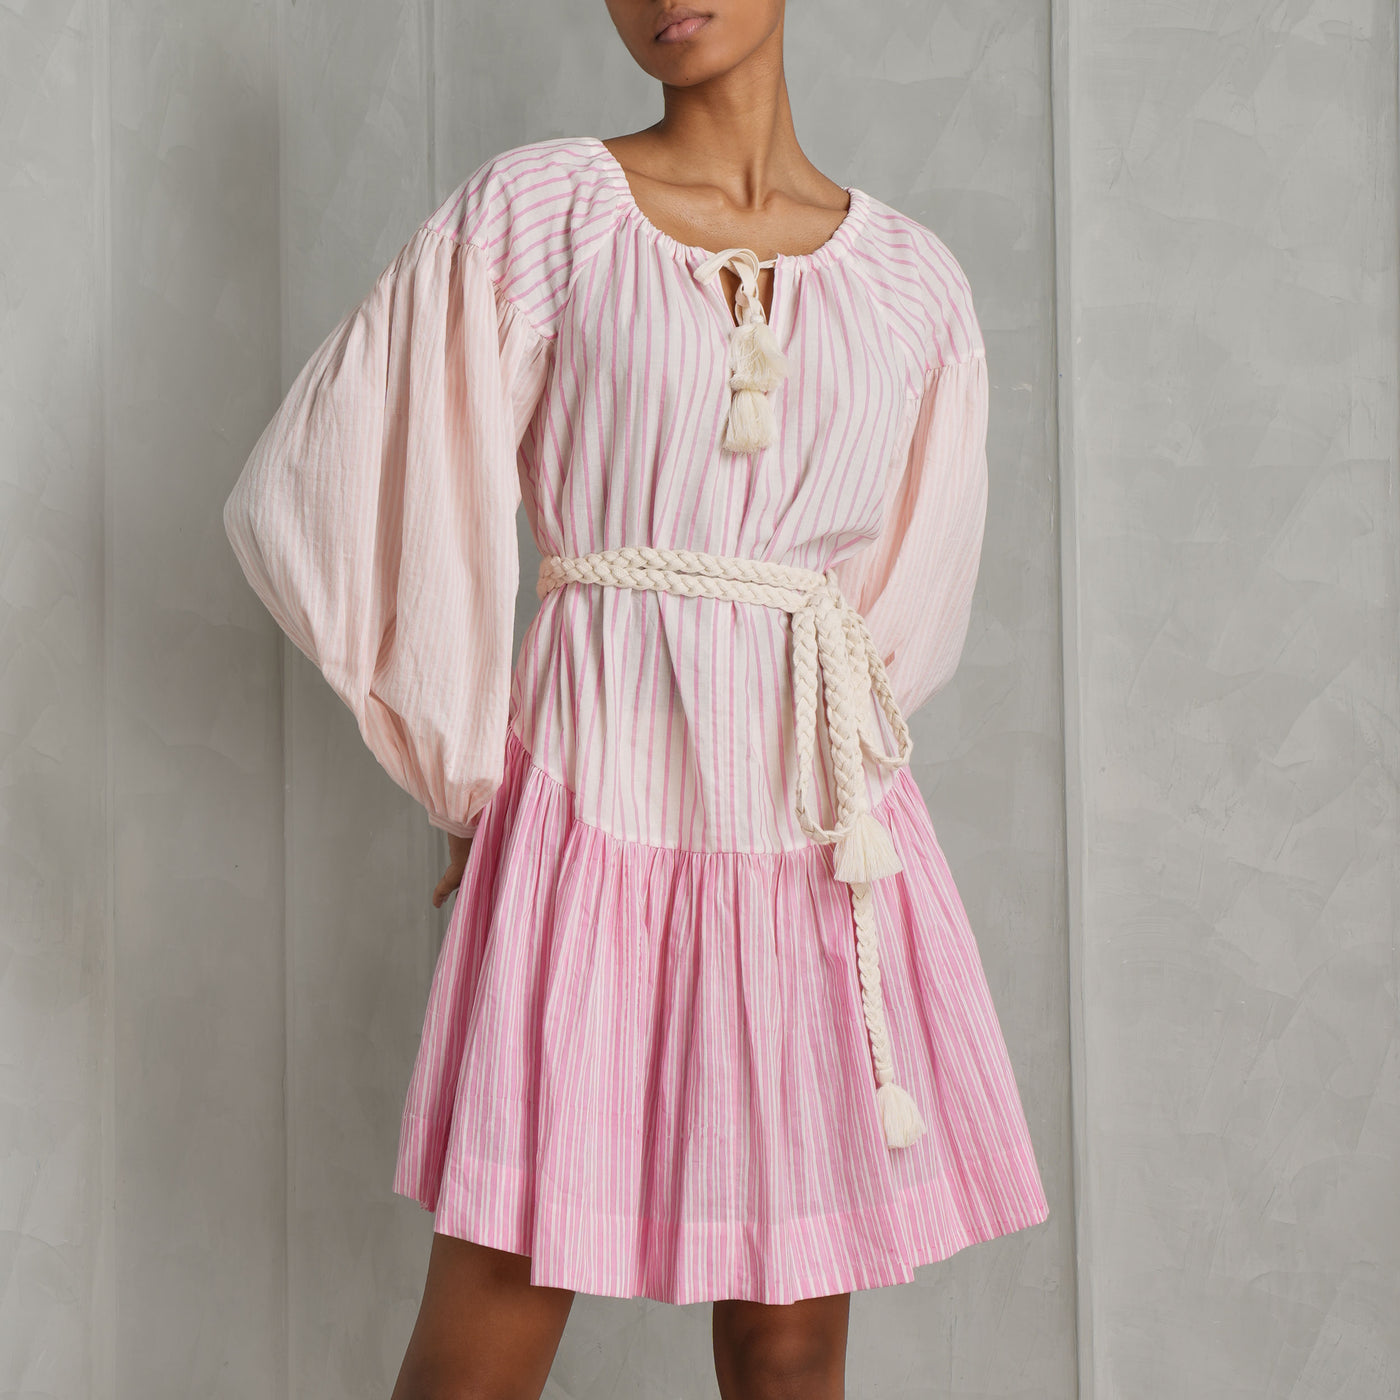 Aish Life pink belted dress